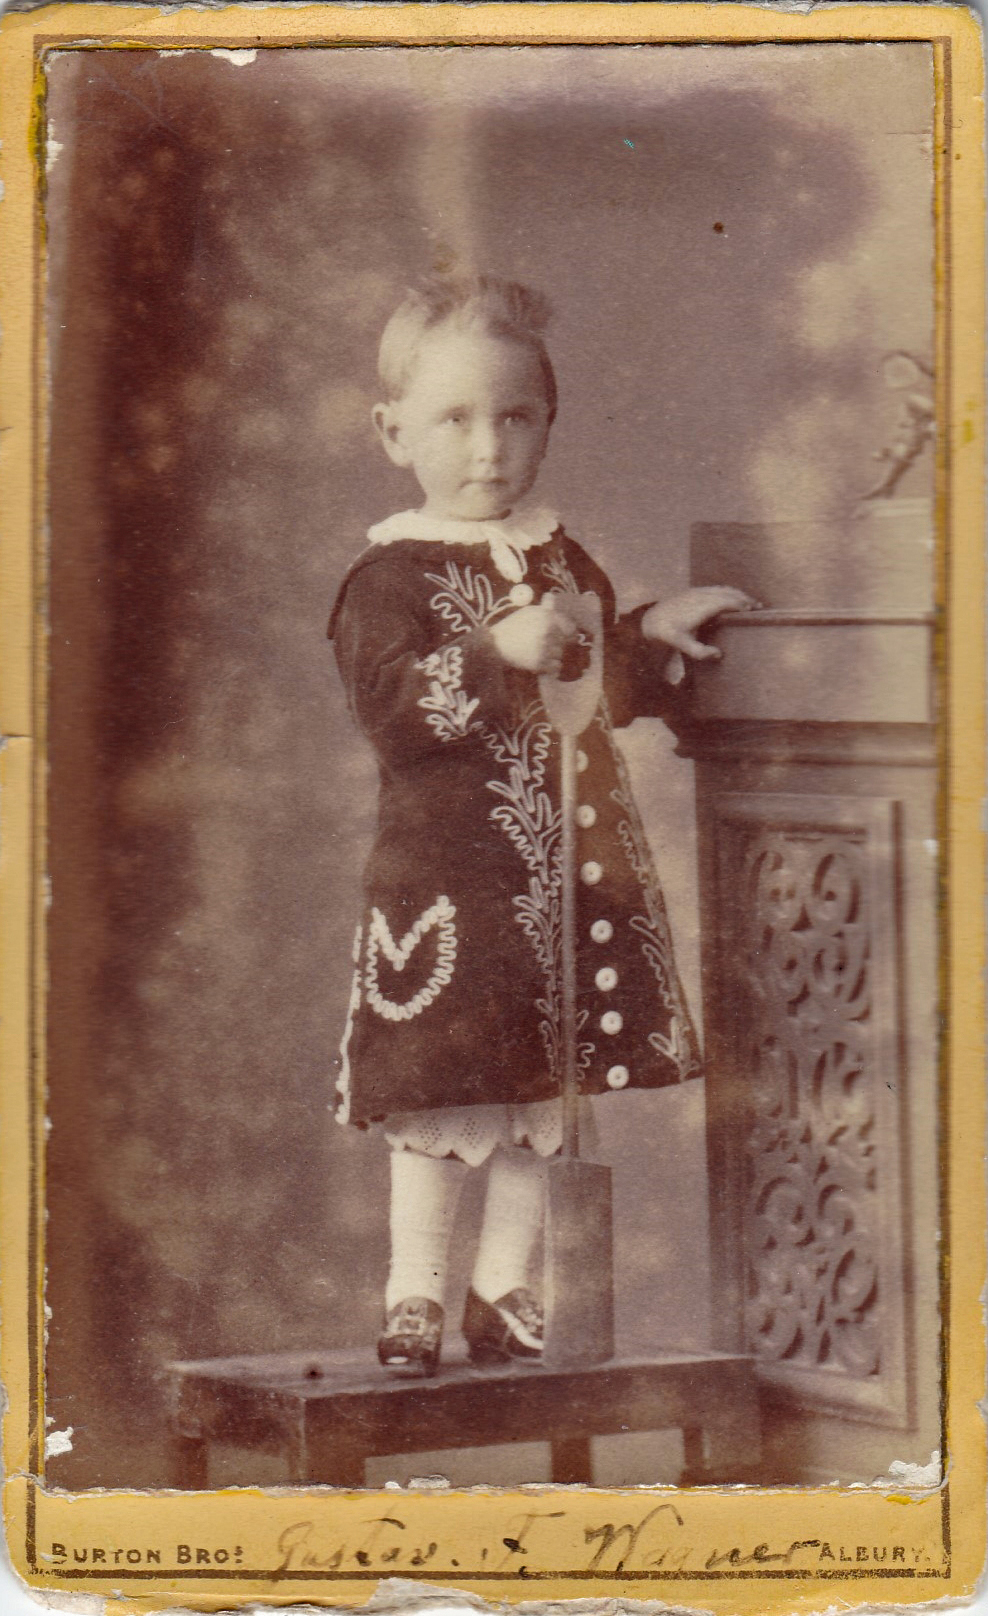 aged photograph of a small child standing on a stool and gripping carved wood furniture for support, he wears an embroidered coat buttoned up